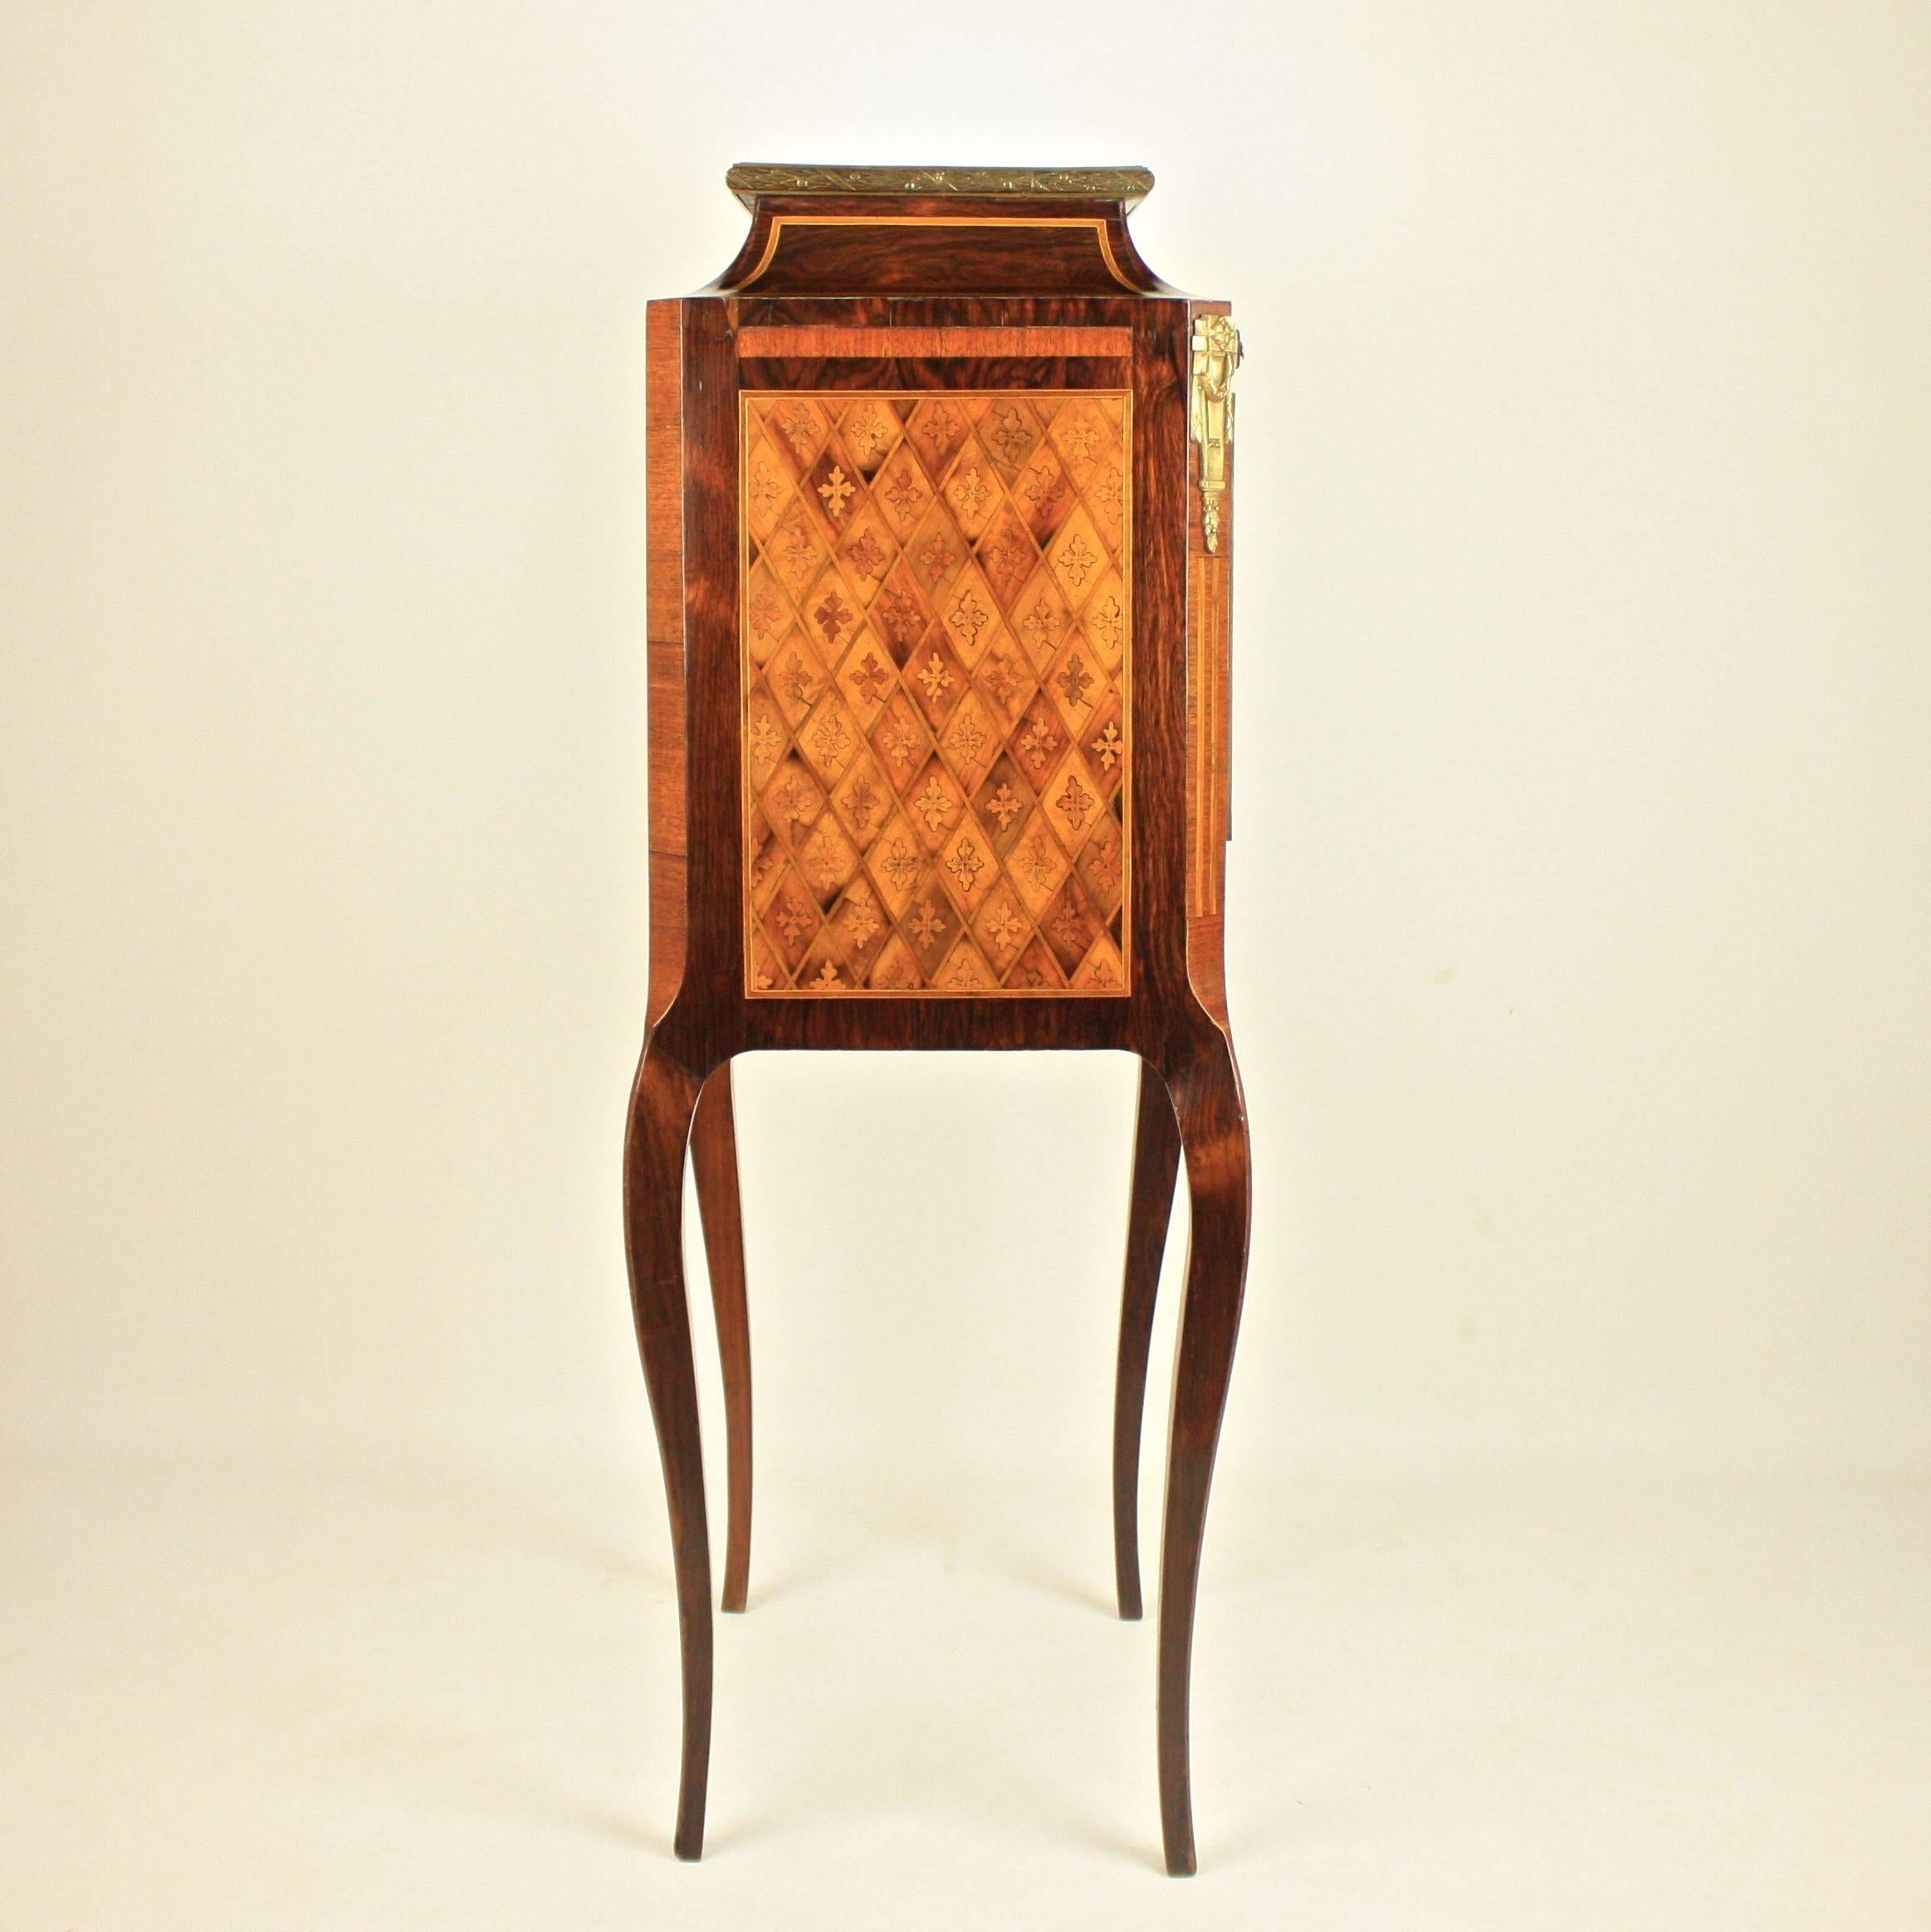 Small 19th Century Cabinet on Stand, in the Manner of L. BOUDIN 1